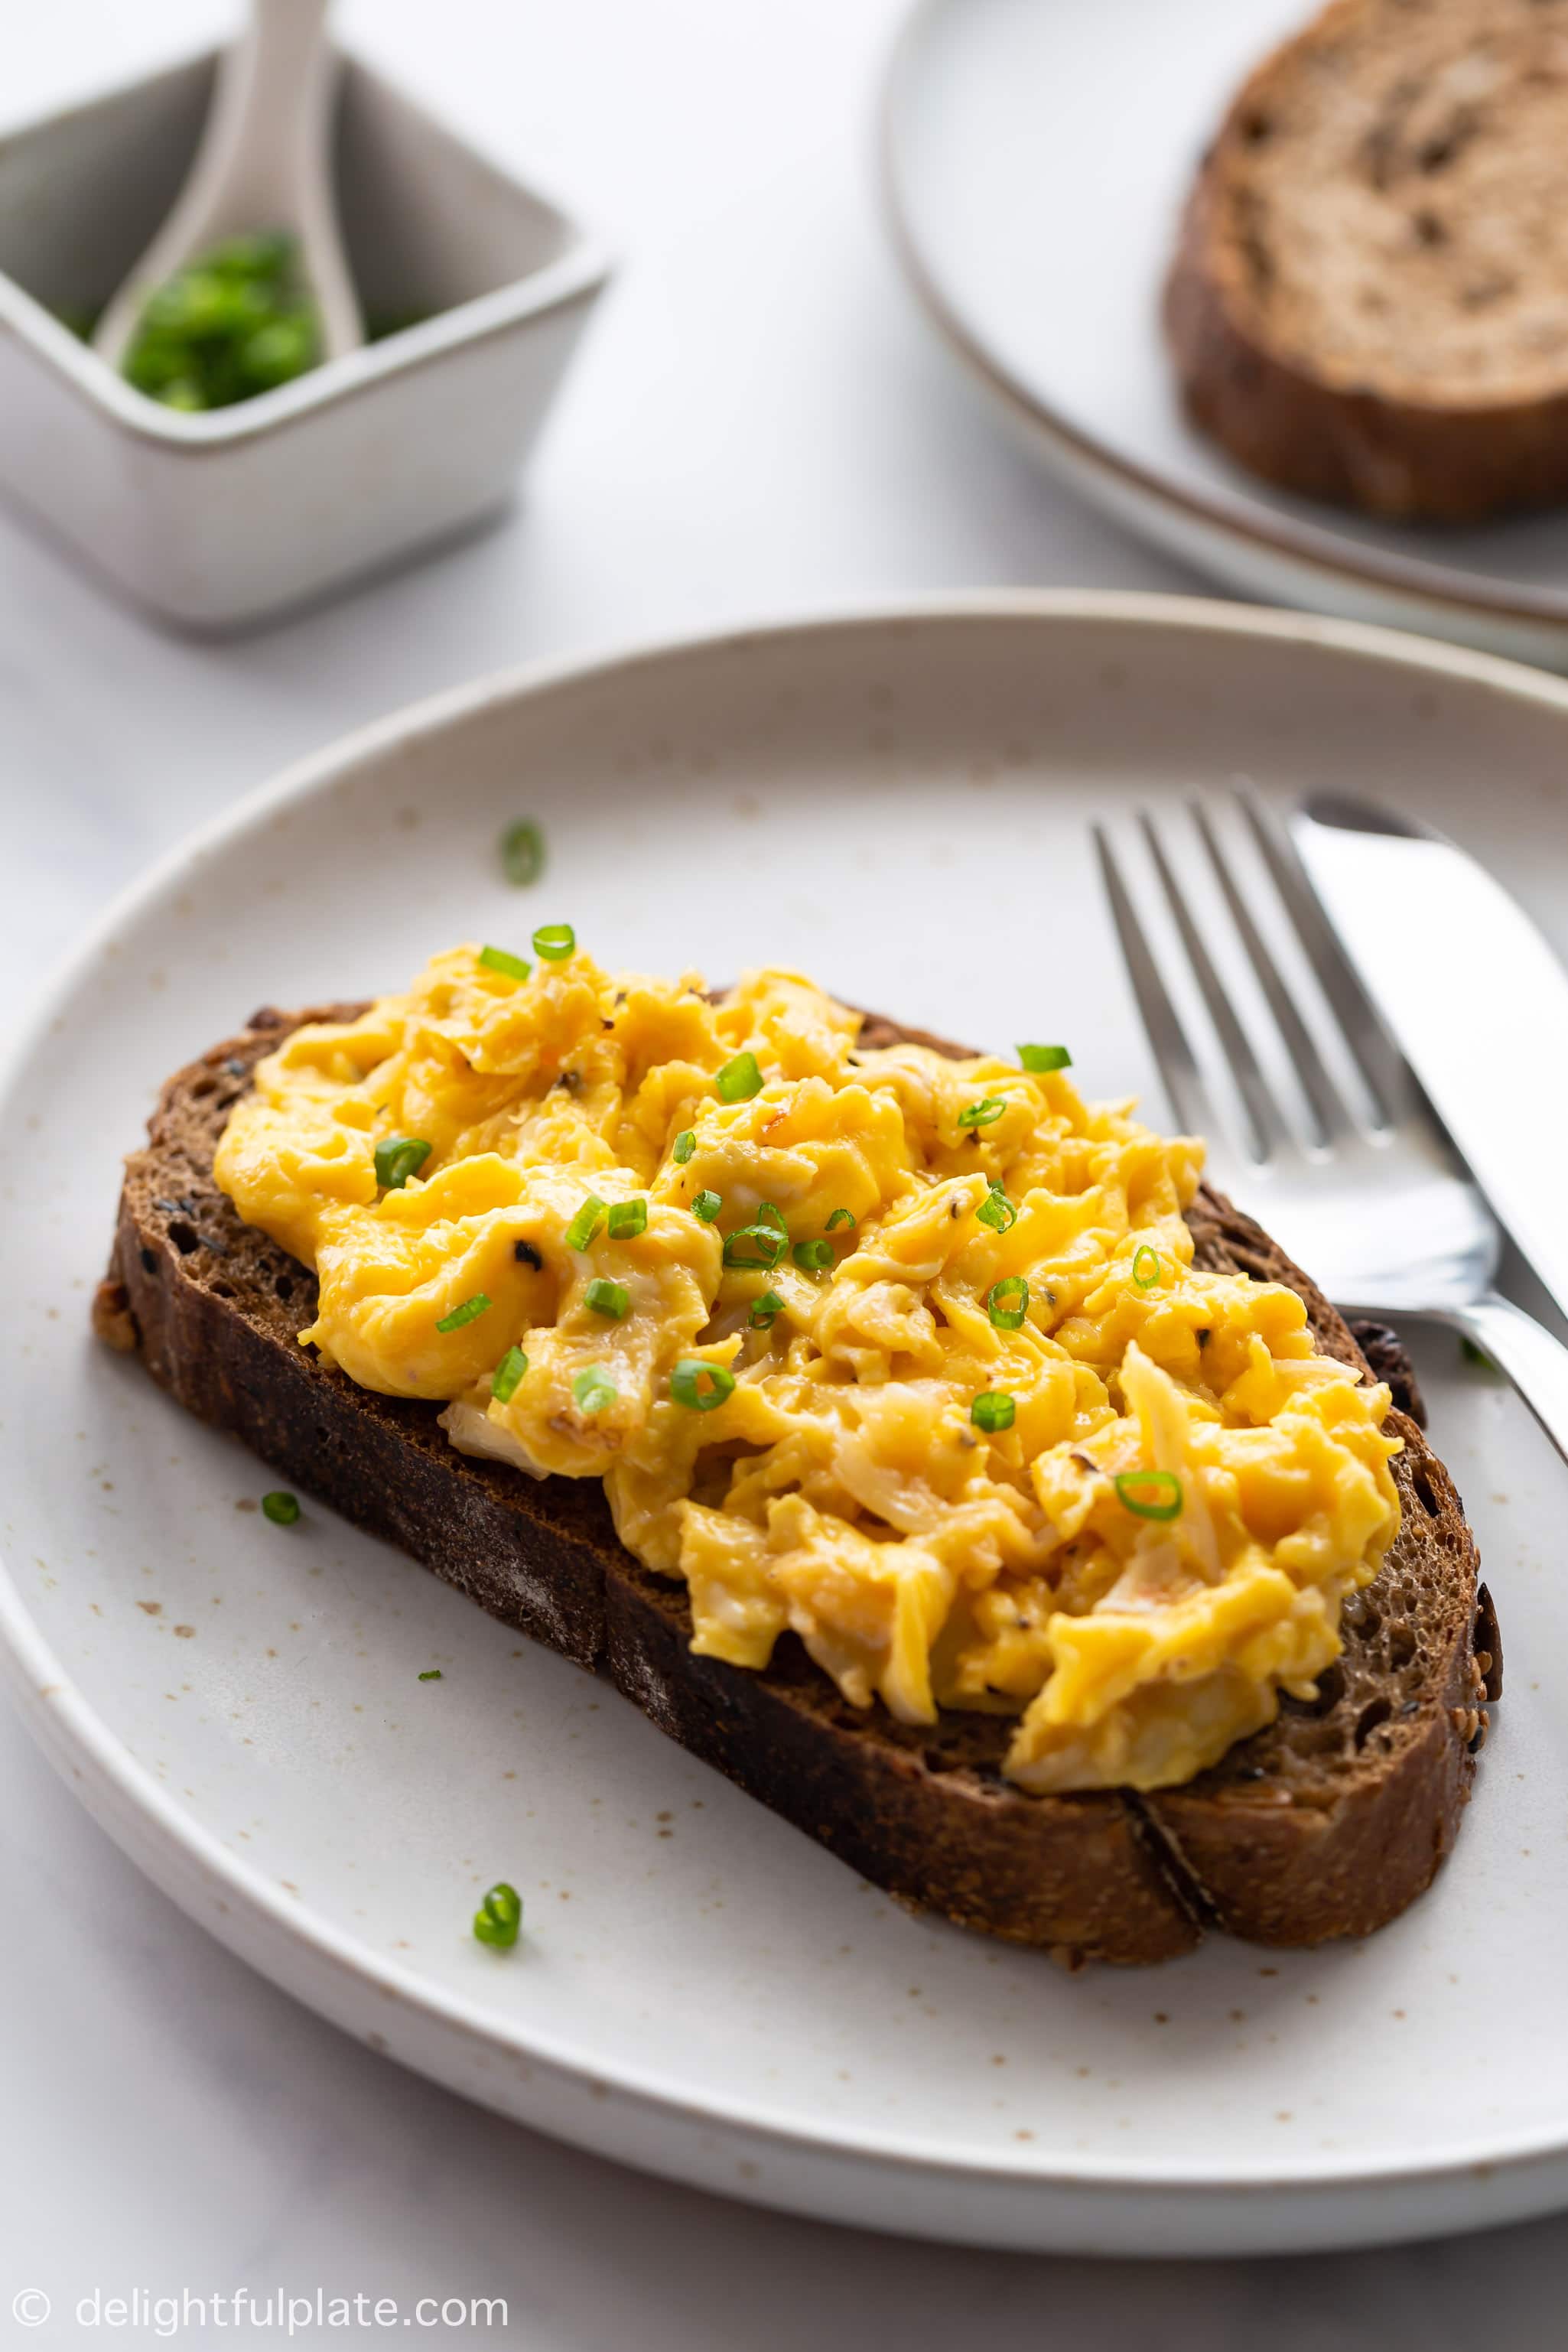 A breakfast classic: French Style Scrambled Eggs, Eats By The Beach